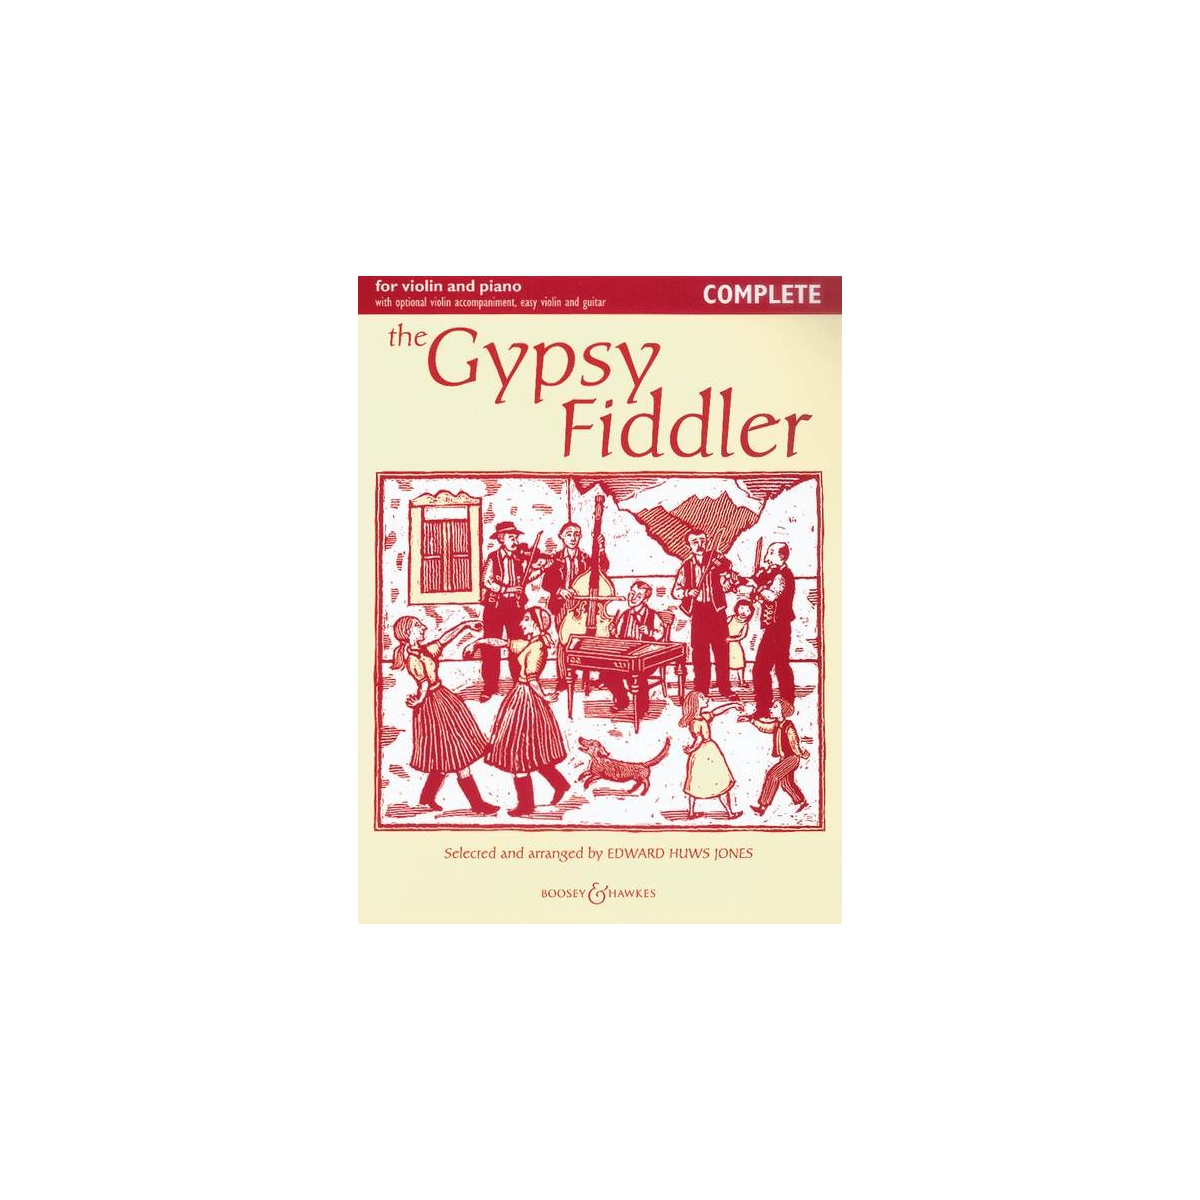 The Gypsy Fiddler [Complete]